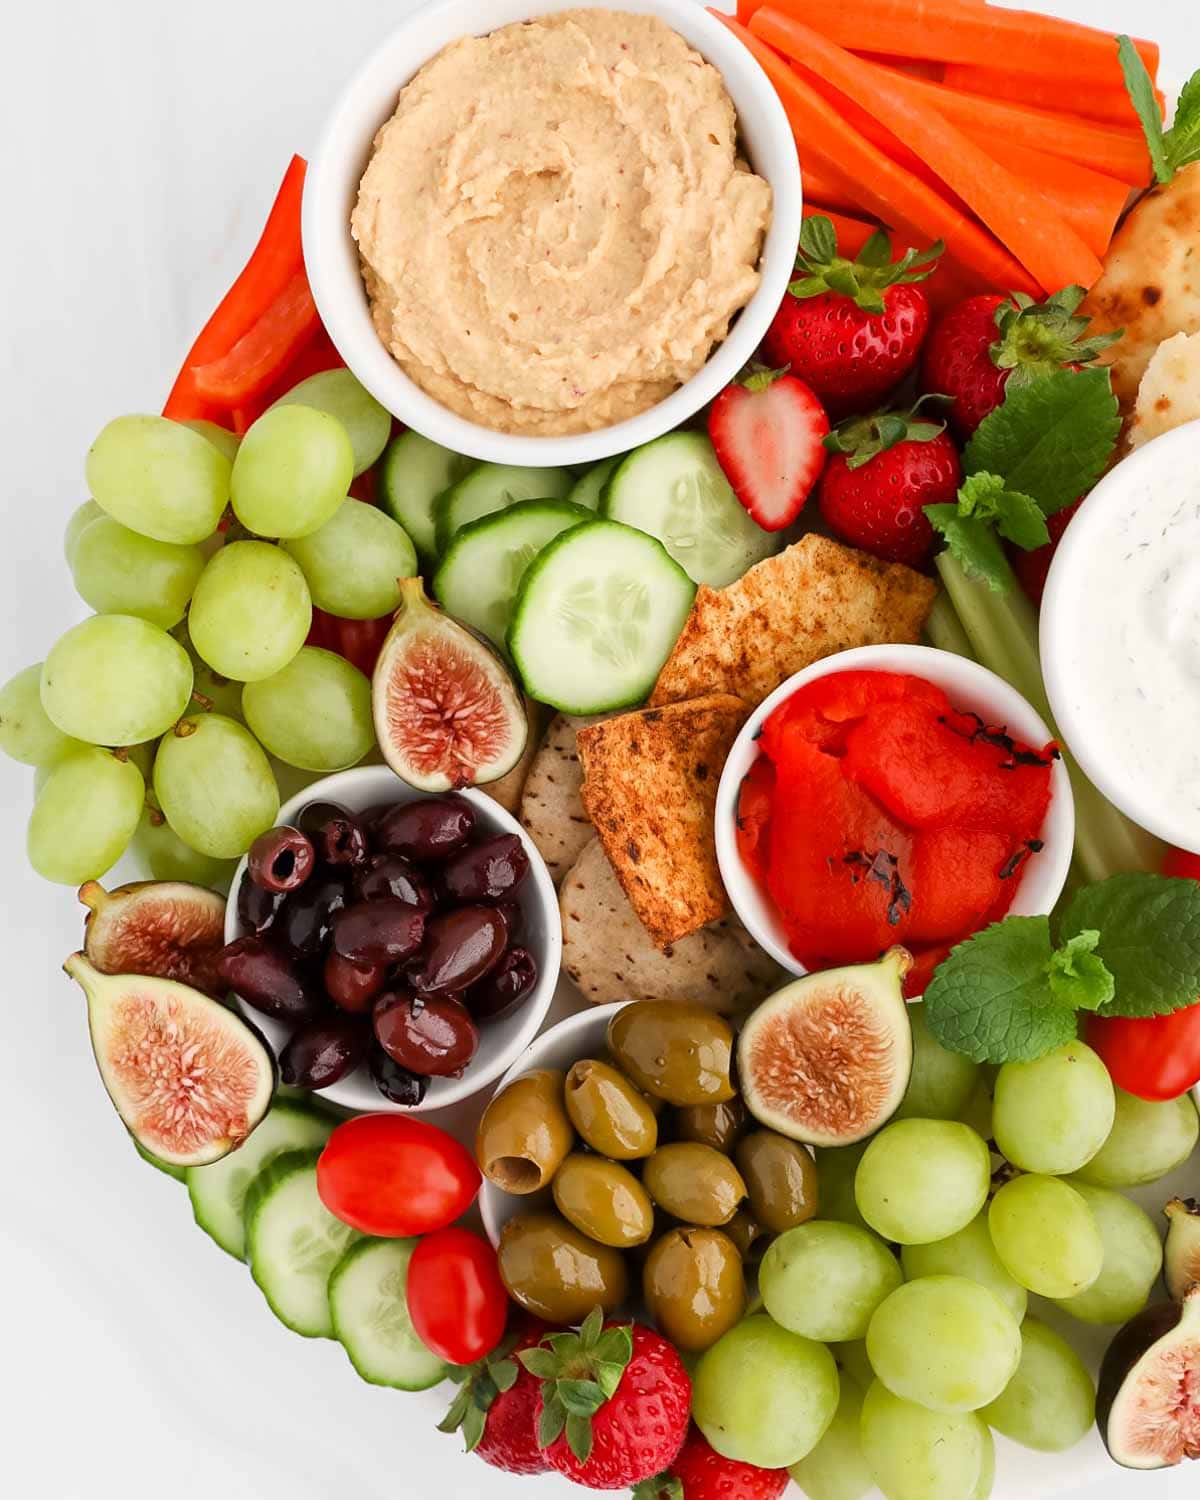 An overhead image of a spread of different foods including: hummus, peppers, olives, grapes, cucumbers, pita, strawberries, mint, and figs.